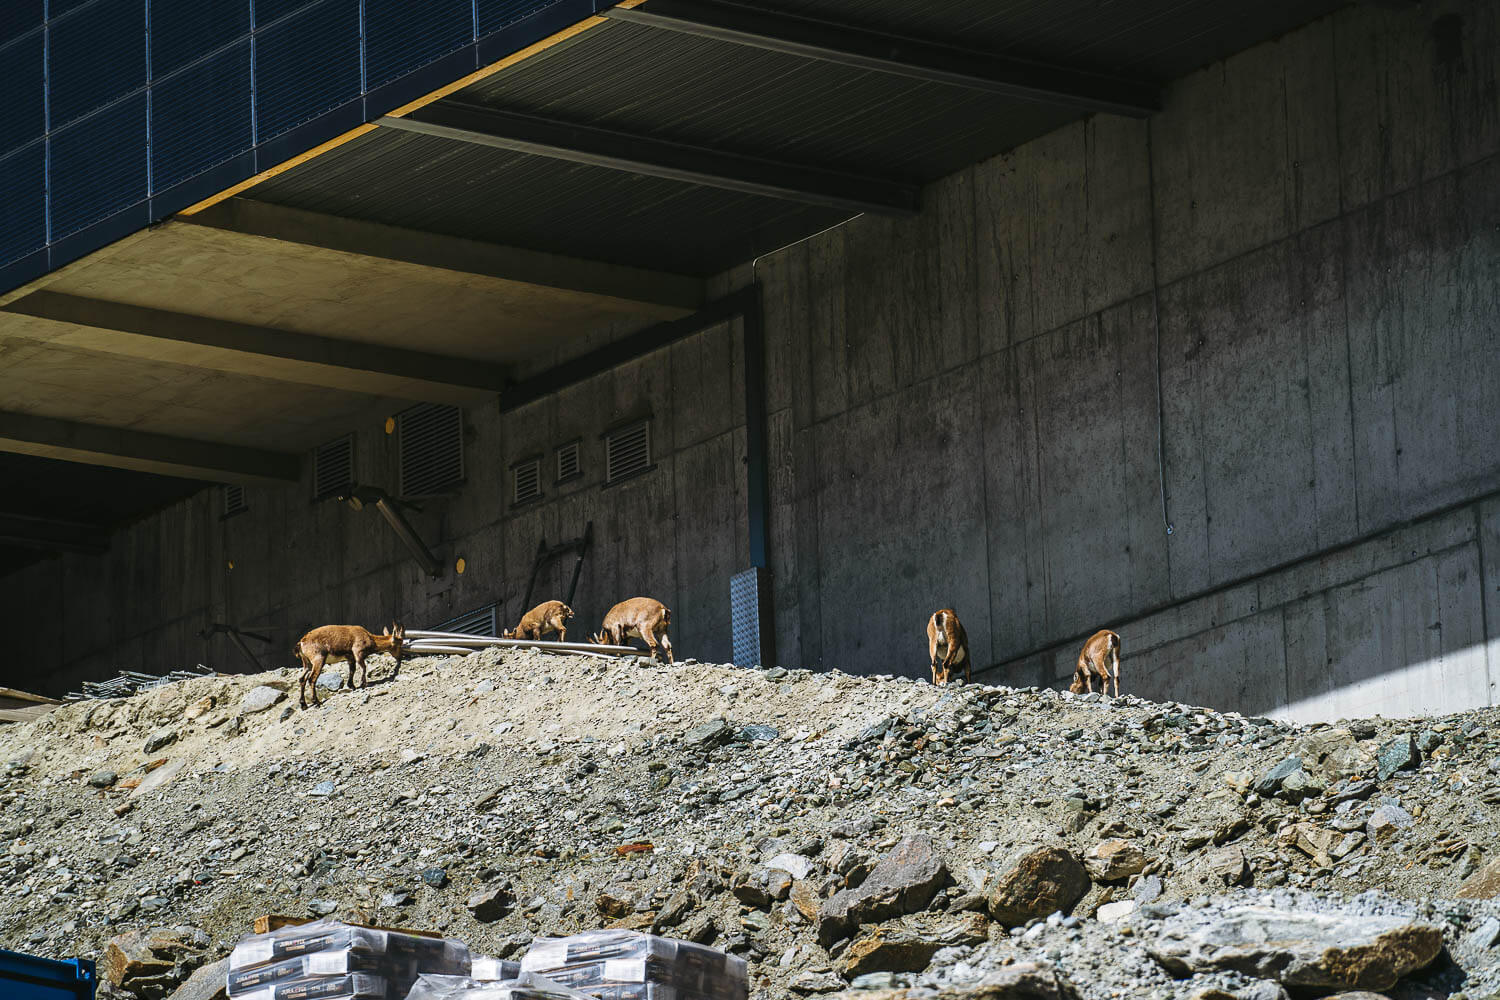 Some wild deers at the Trockener Steg cable car station